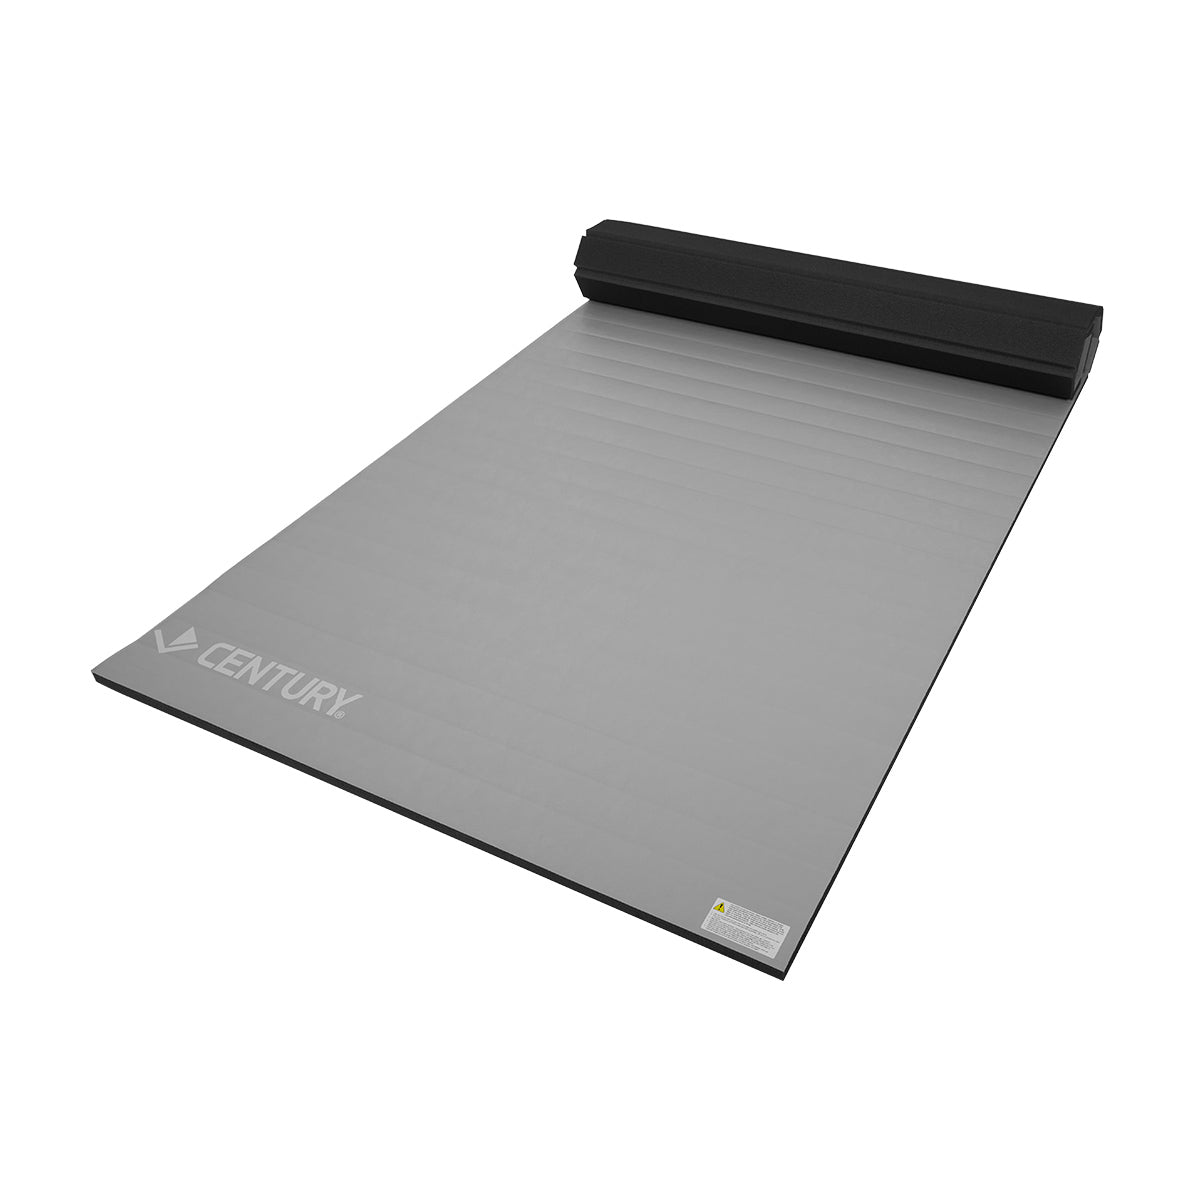 Smooth Home Rollout Mat - 5' x 10' x 1.25"